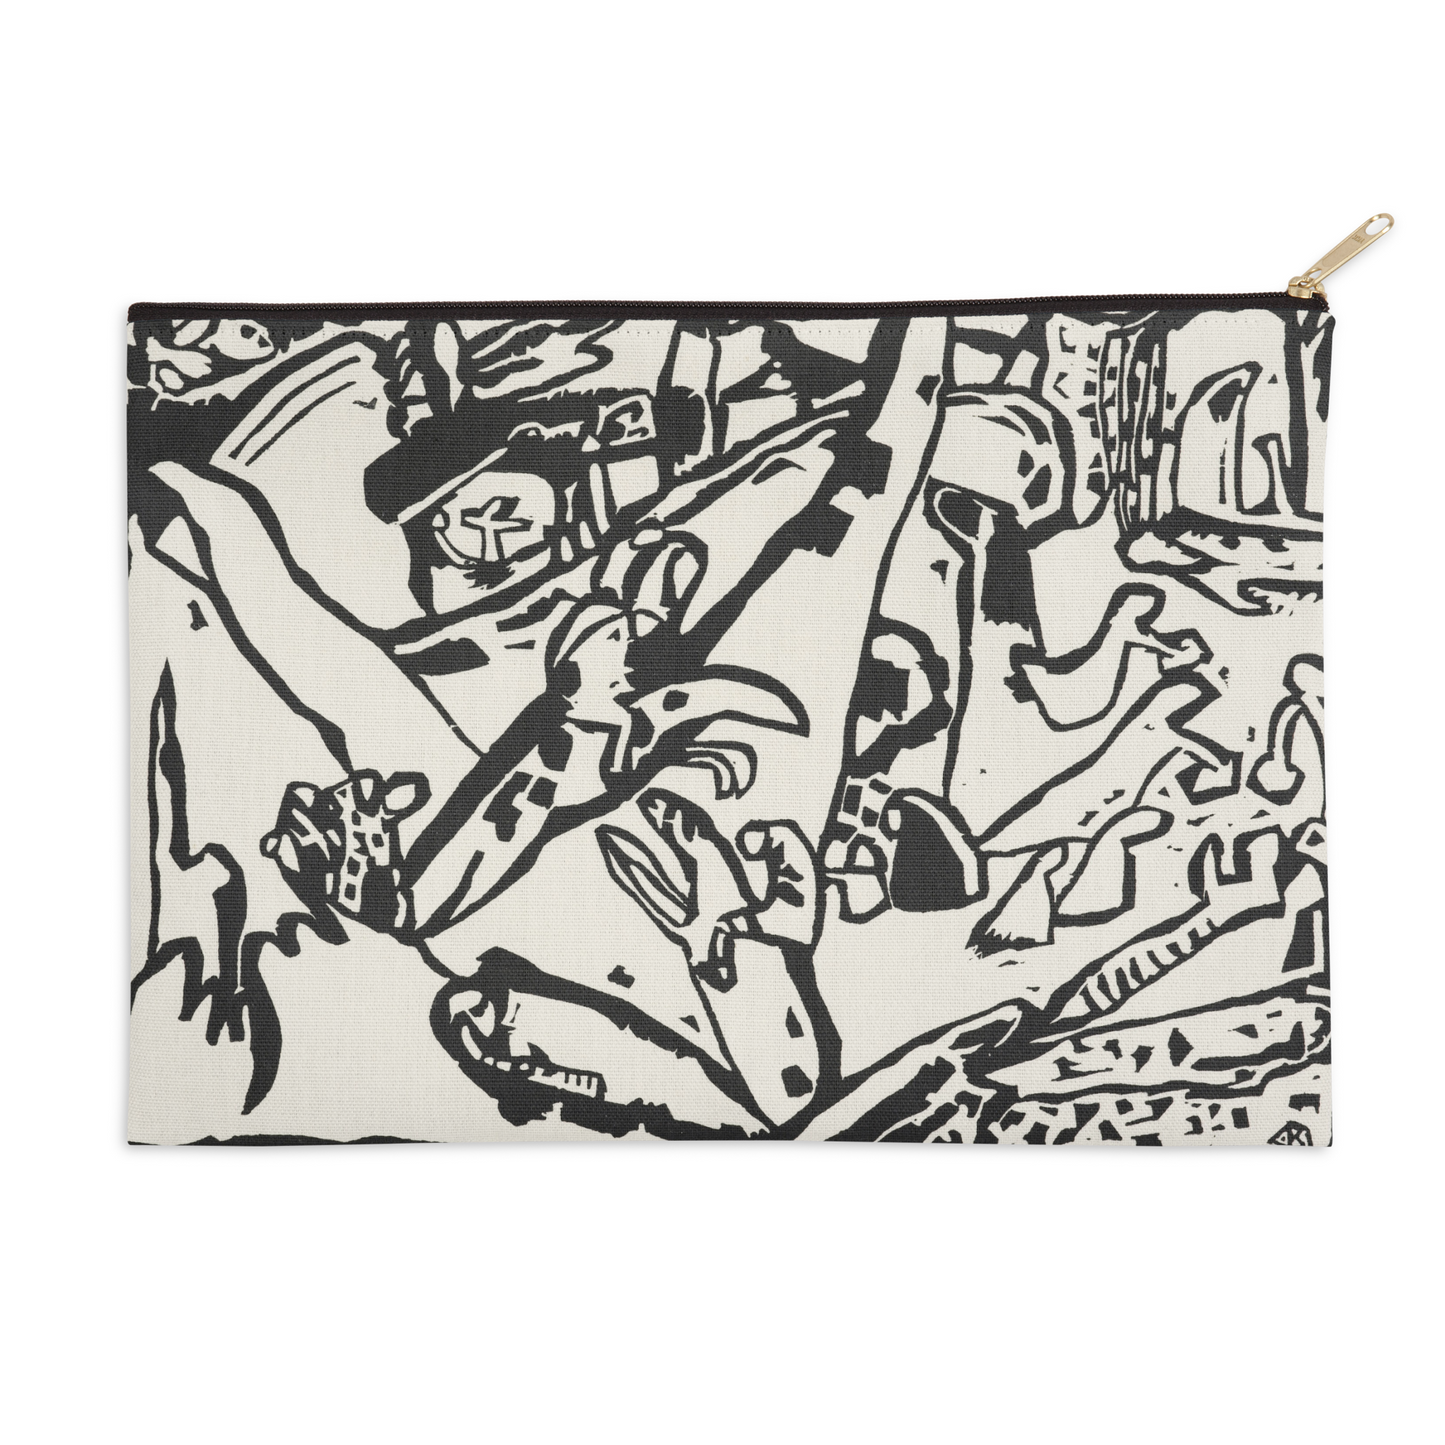 Black and White Wassily Kandinsky Composition 2 Zip Pouch